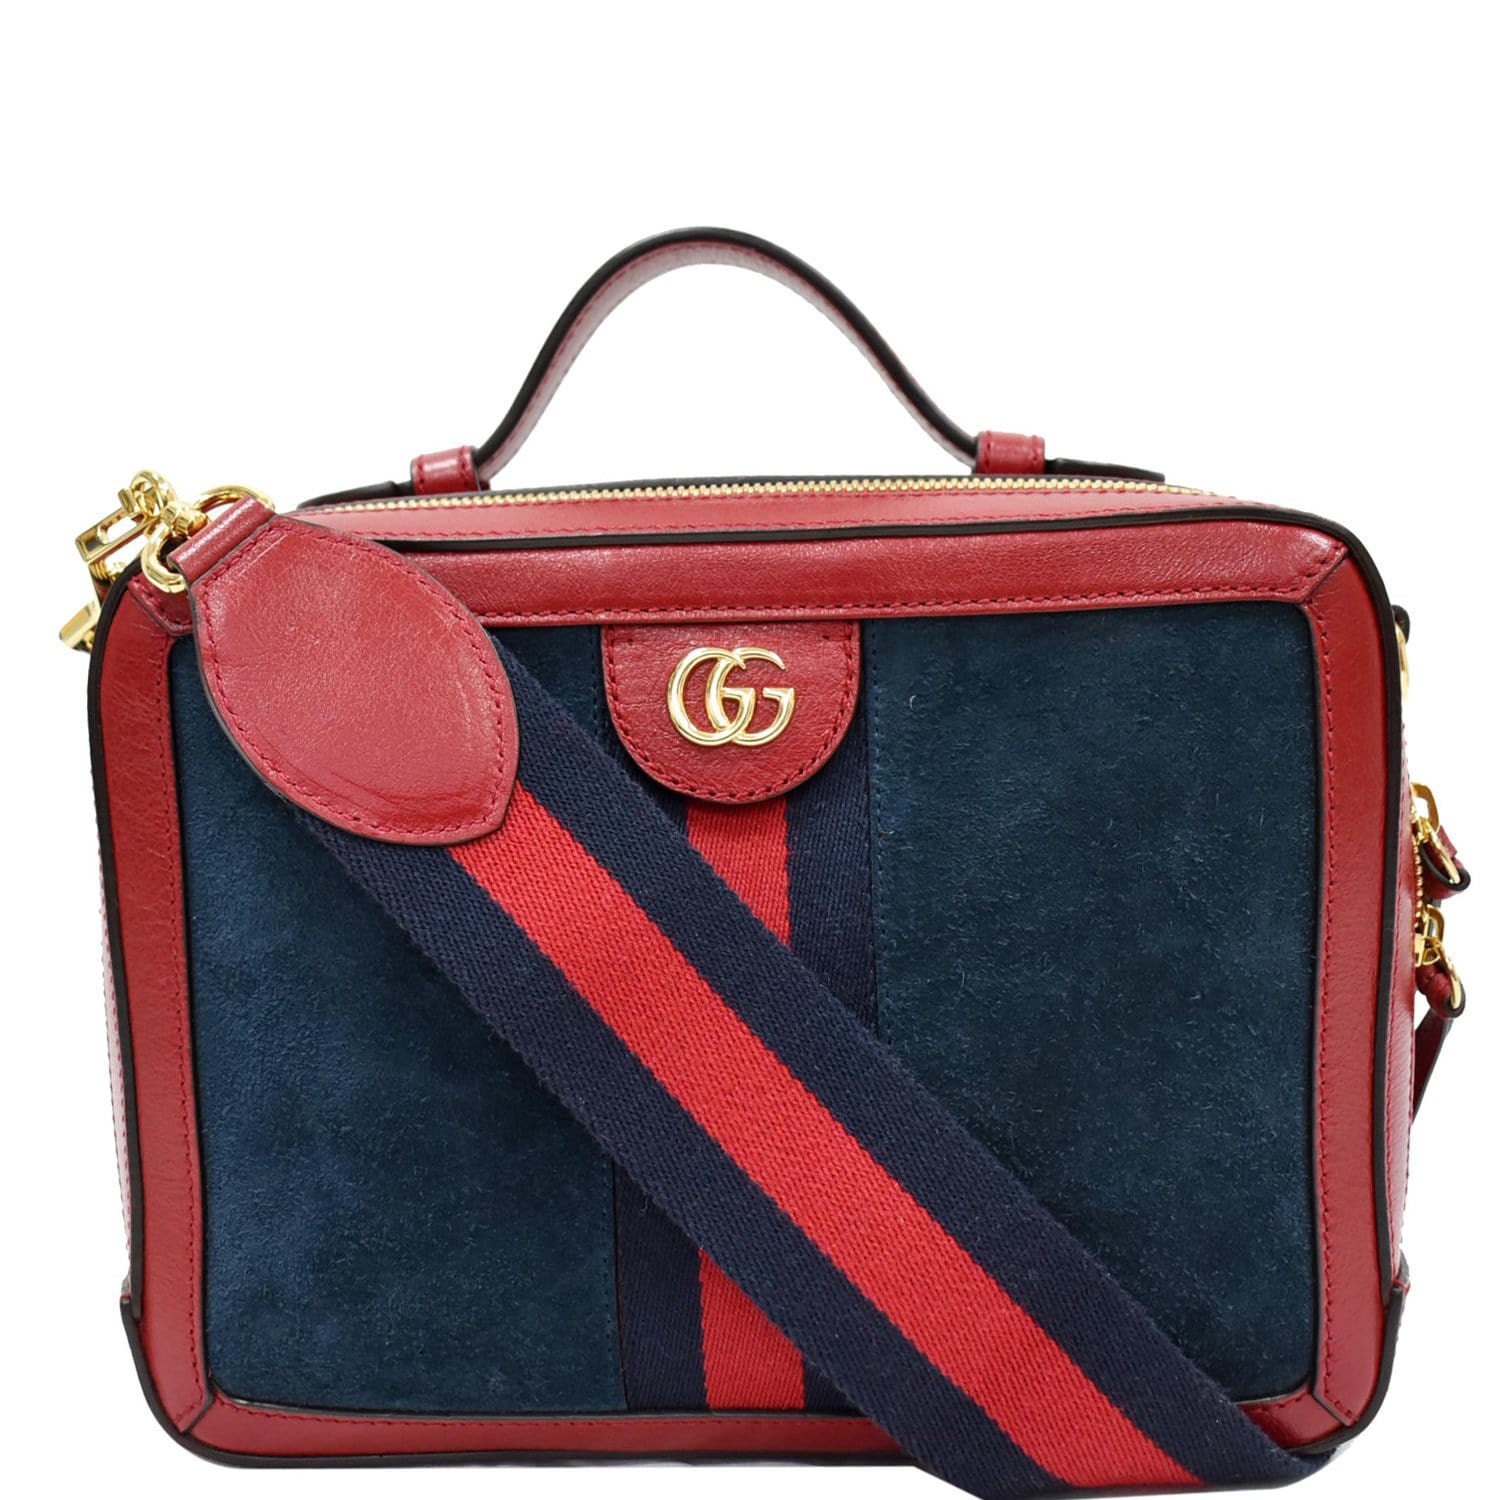 GUCCI Ophidia GG Small Web Suede Leather Top Handle Shoulder Bag Red 5